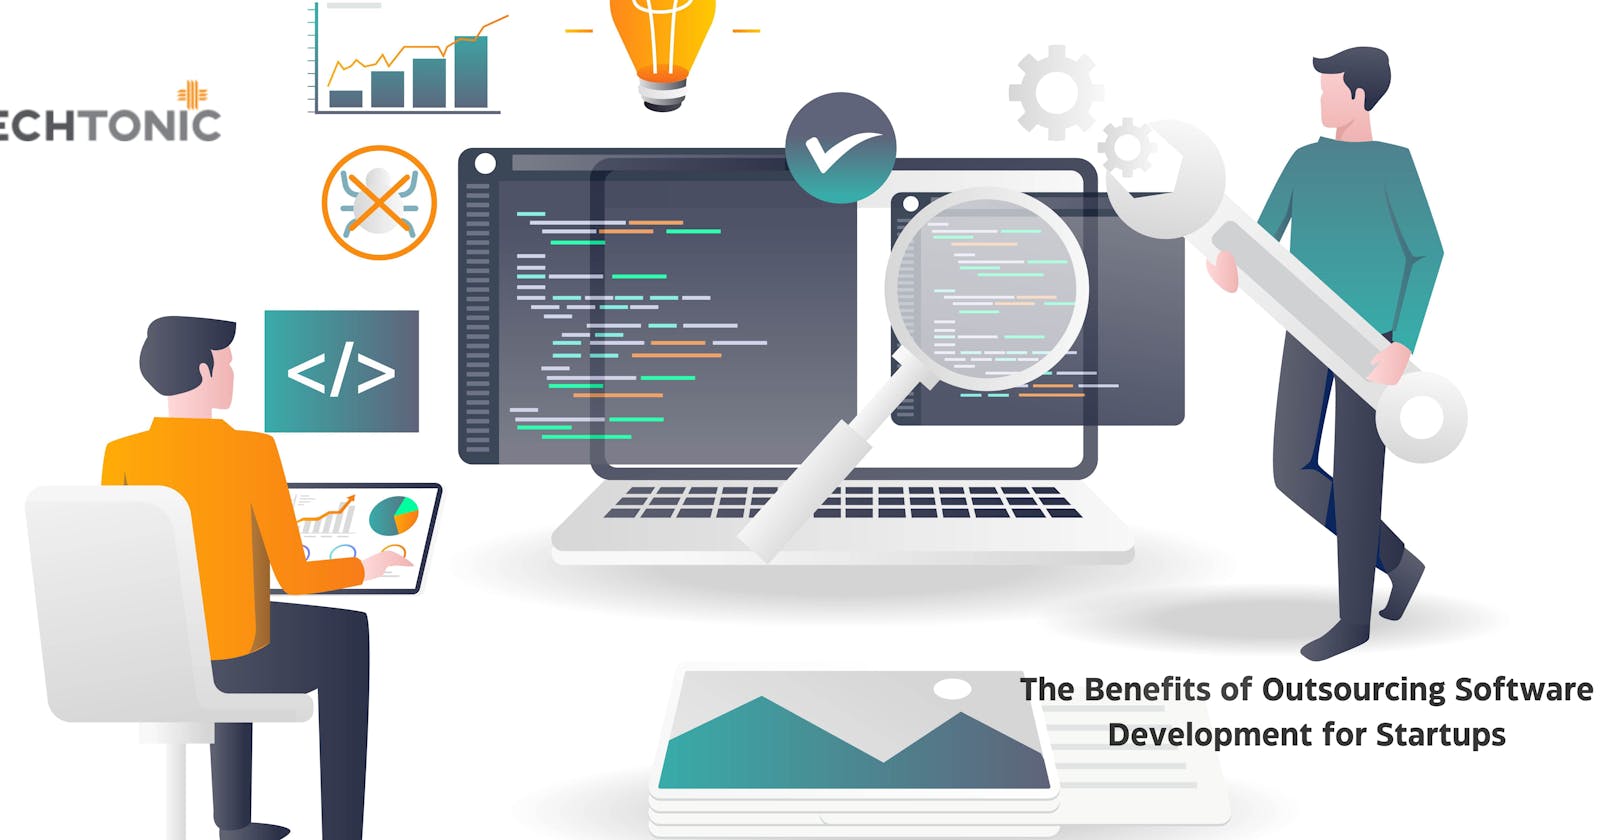 The Benefits of Outsourcing Software Development for Startups